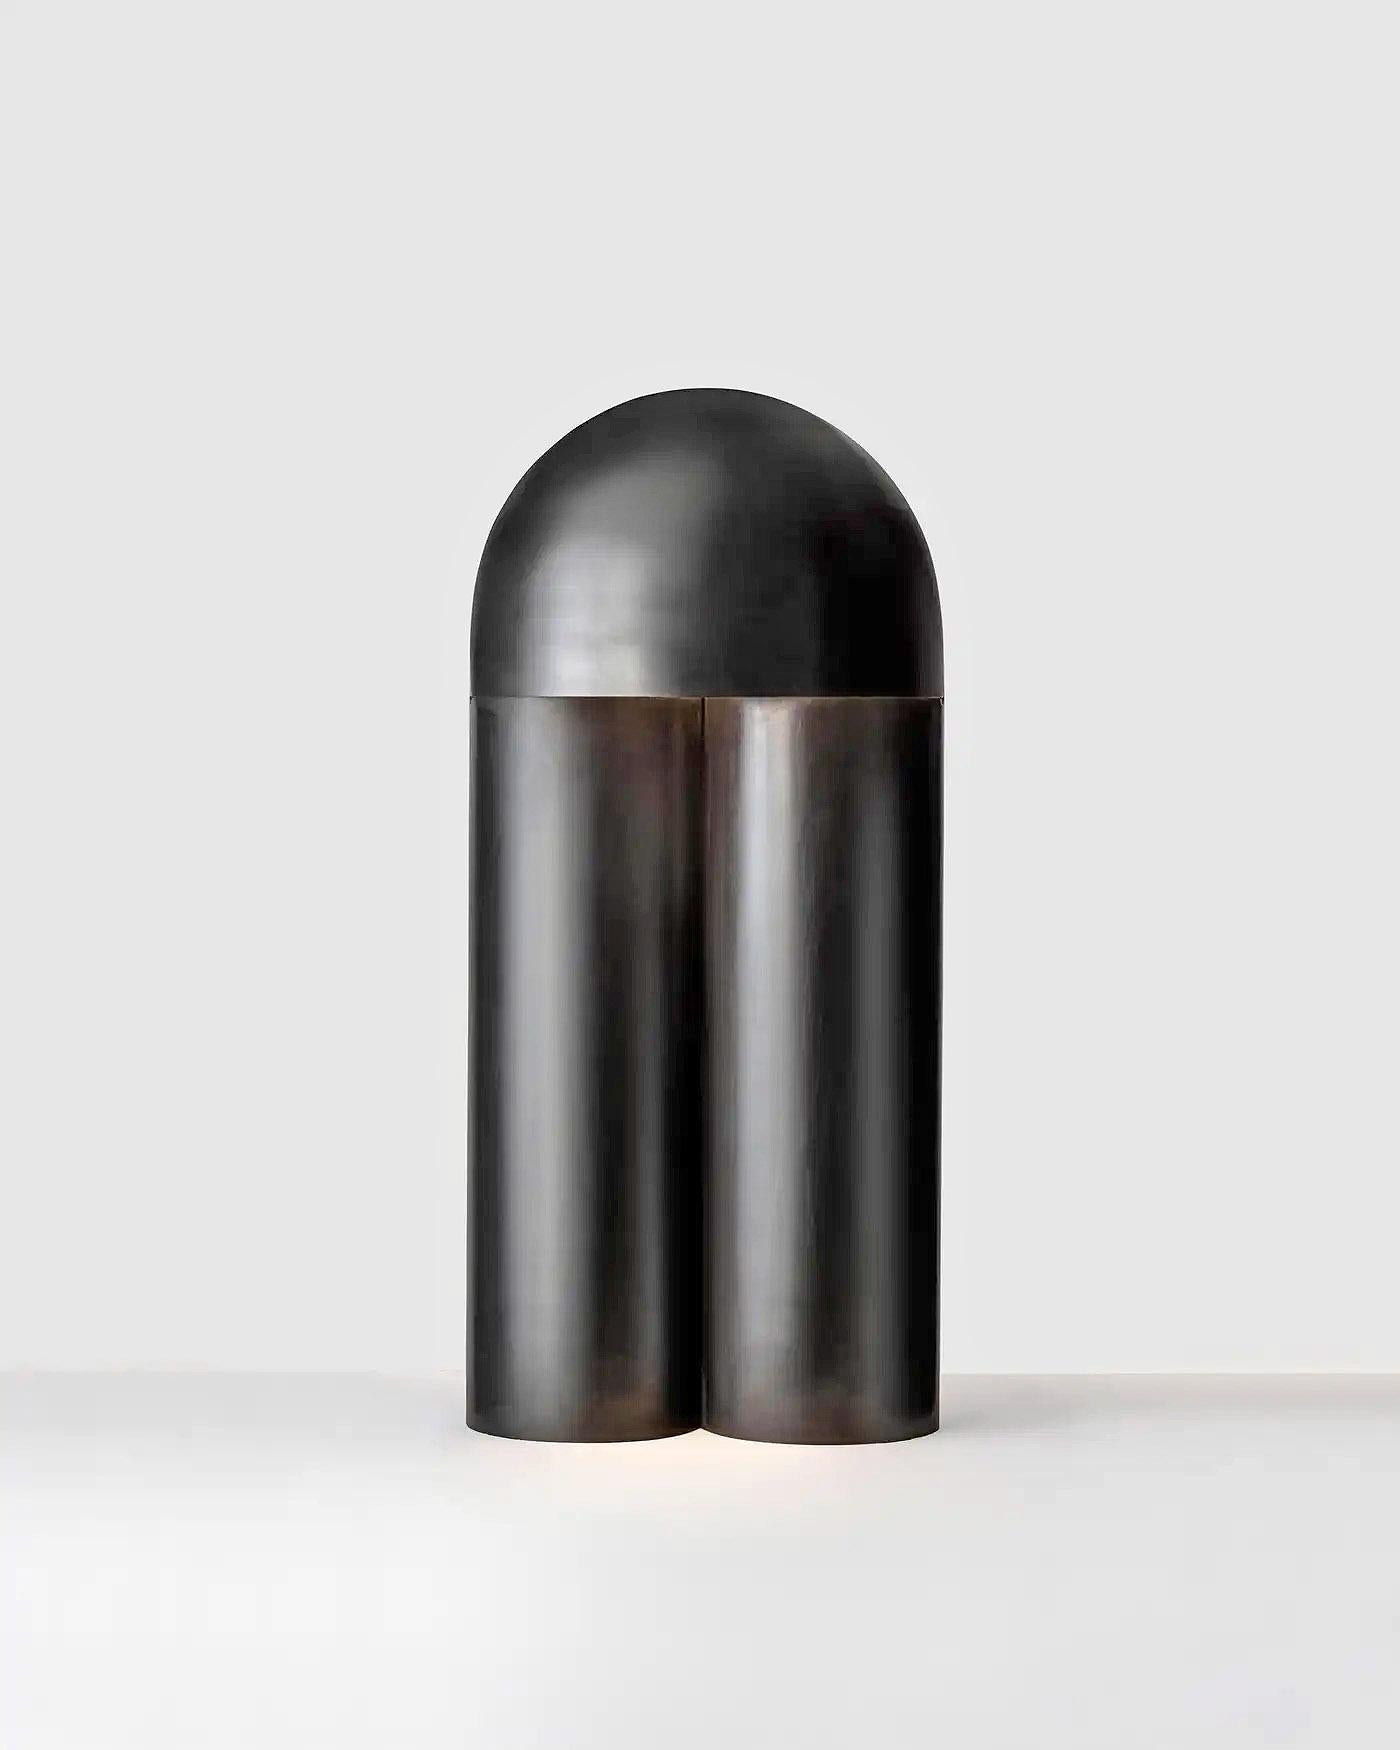 Contemporary Burnt Brass Sculpted Table Lamp, Monolith Small by Paul Matter

The Monolith lamp is an exercise in reduction. Sculpted out of a single body with the help of simple scores and folds, the lamps geometry, surface texture and finish of the